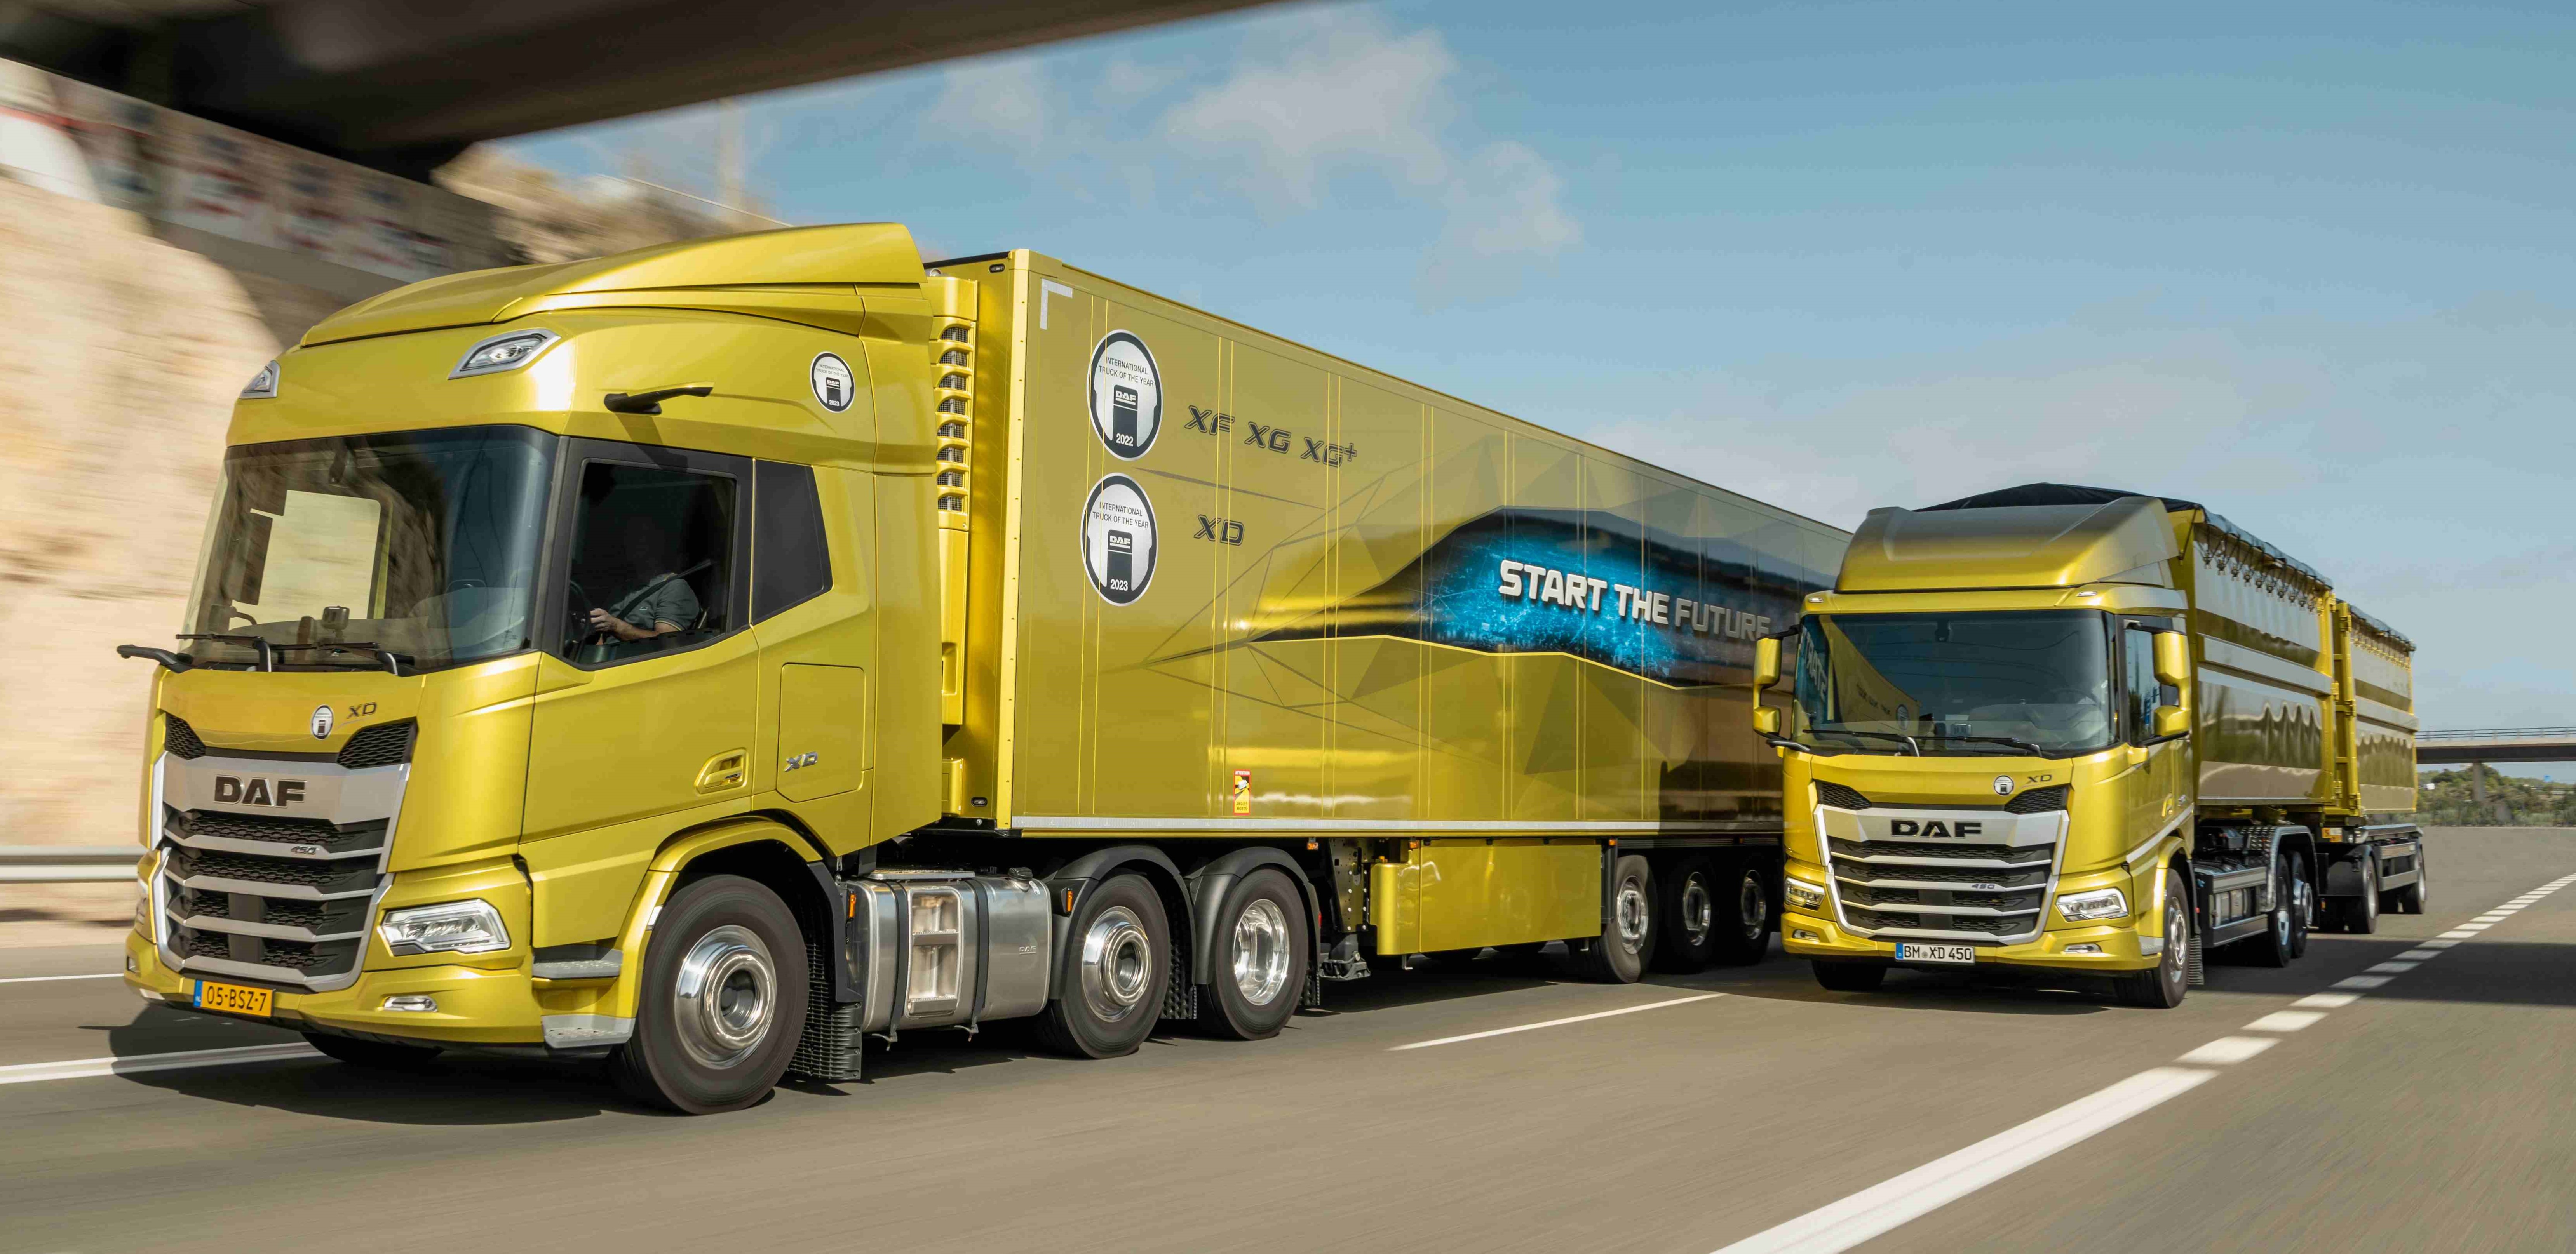 Attachment MS-0025-23 01. DAF introduces full range of enhanced safety features